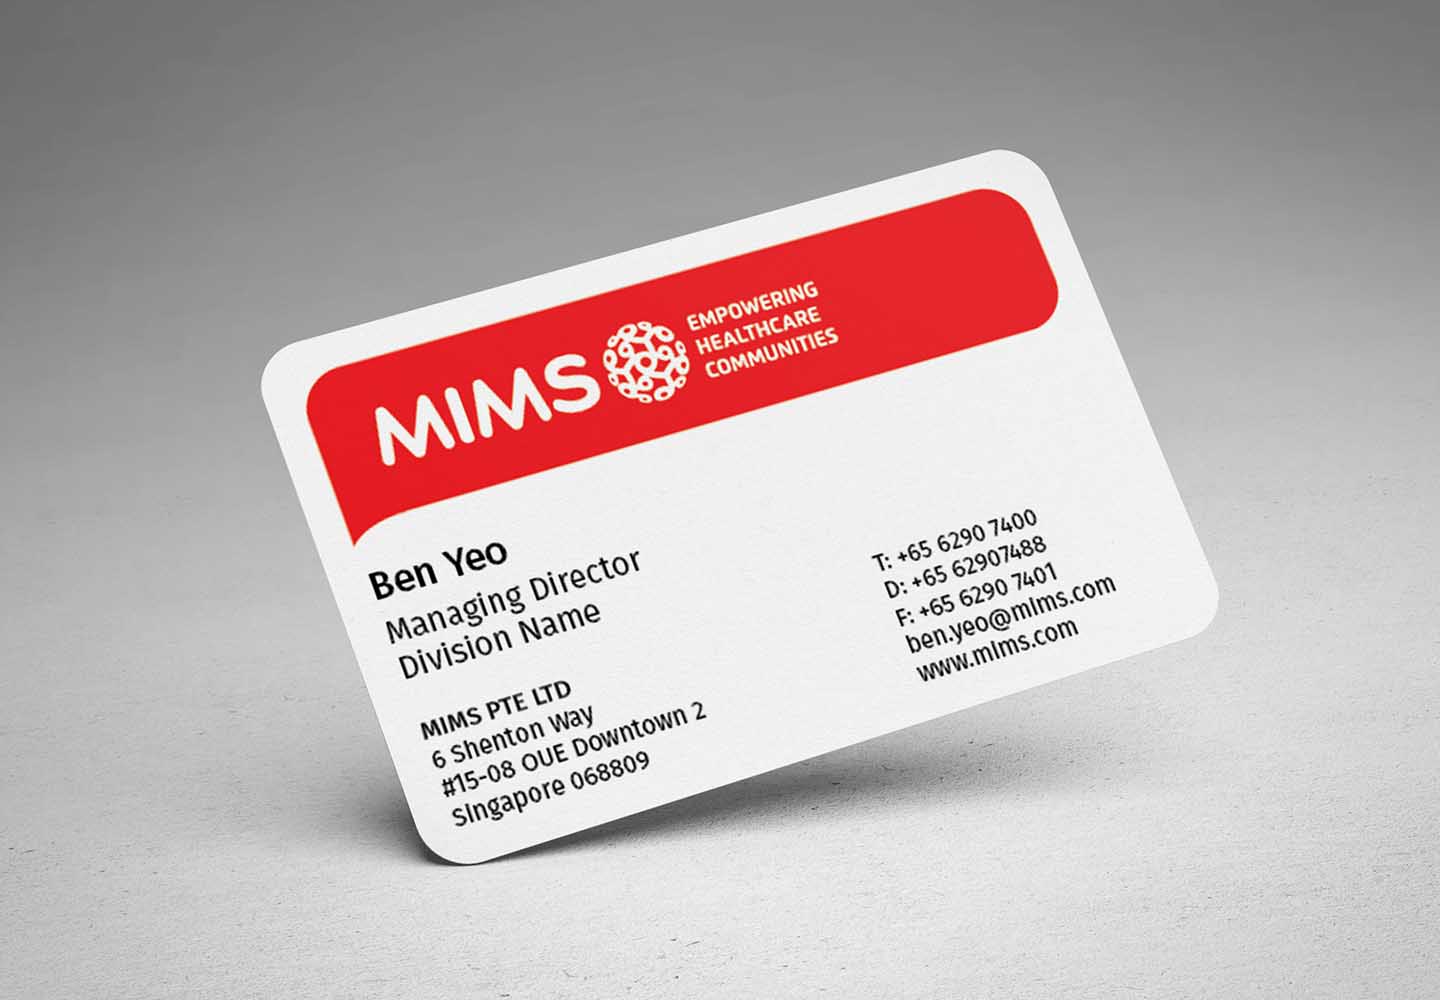 Brand Consultancy in Healthcare Industry. Business Card for MIMS.